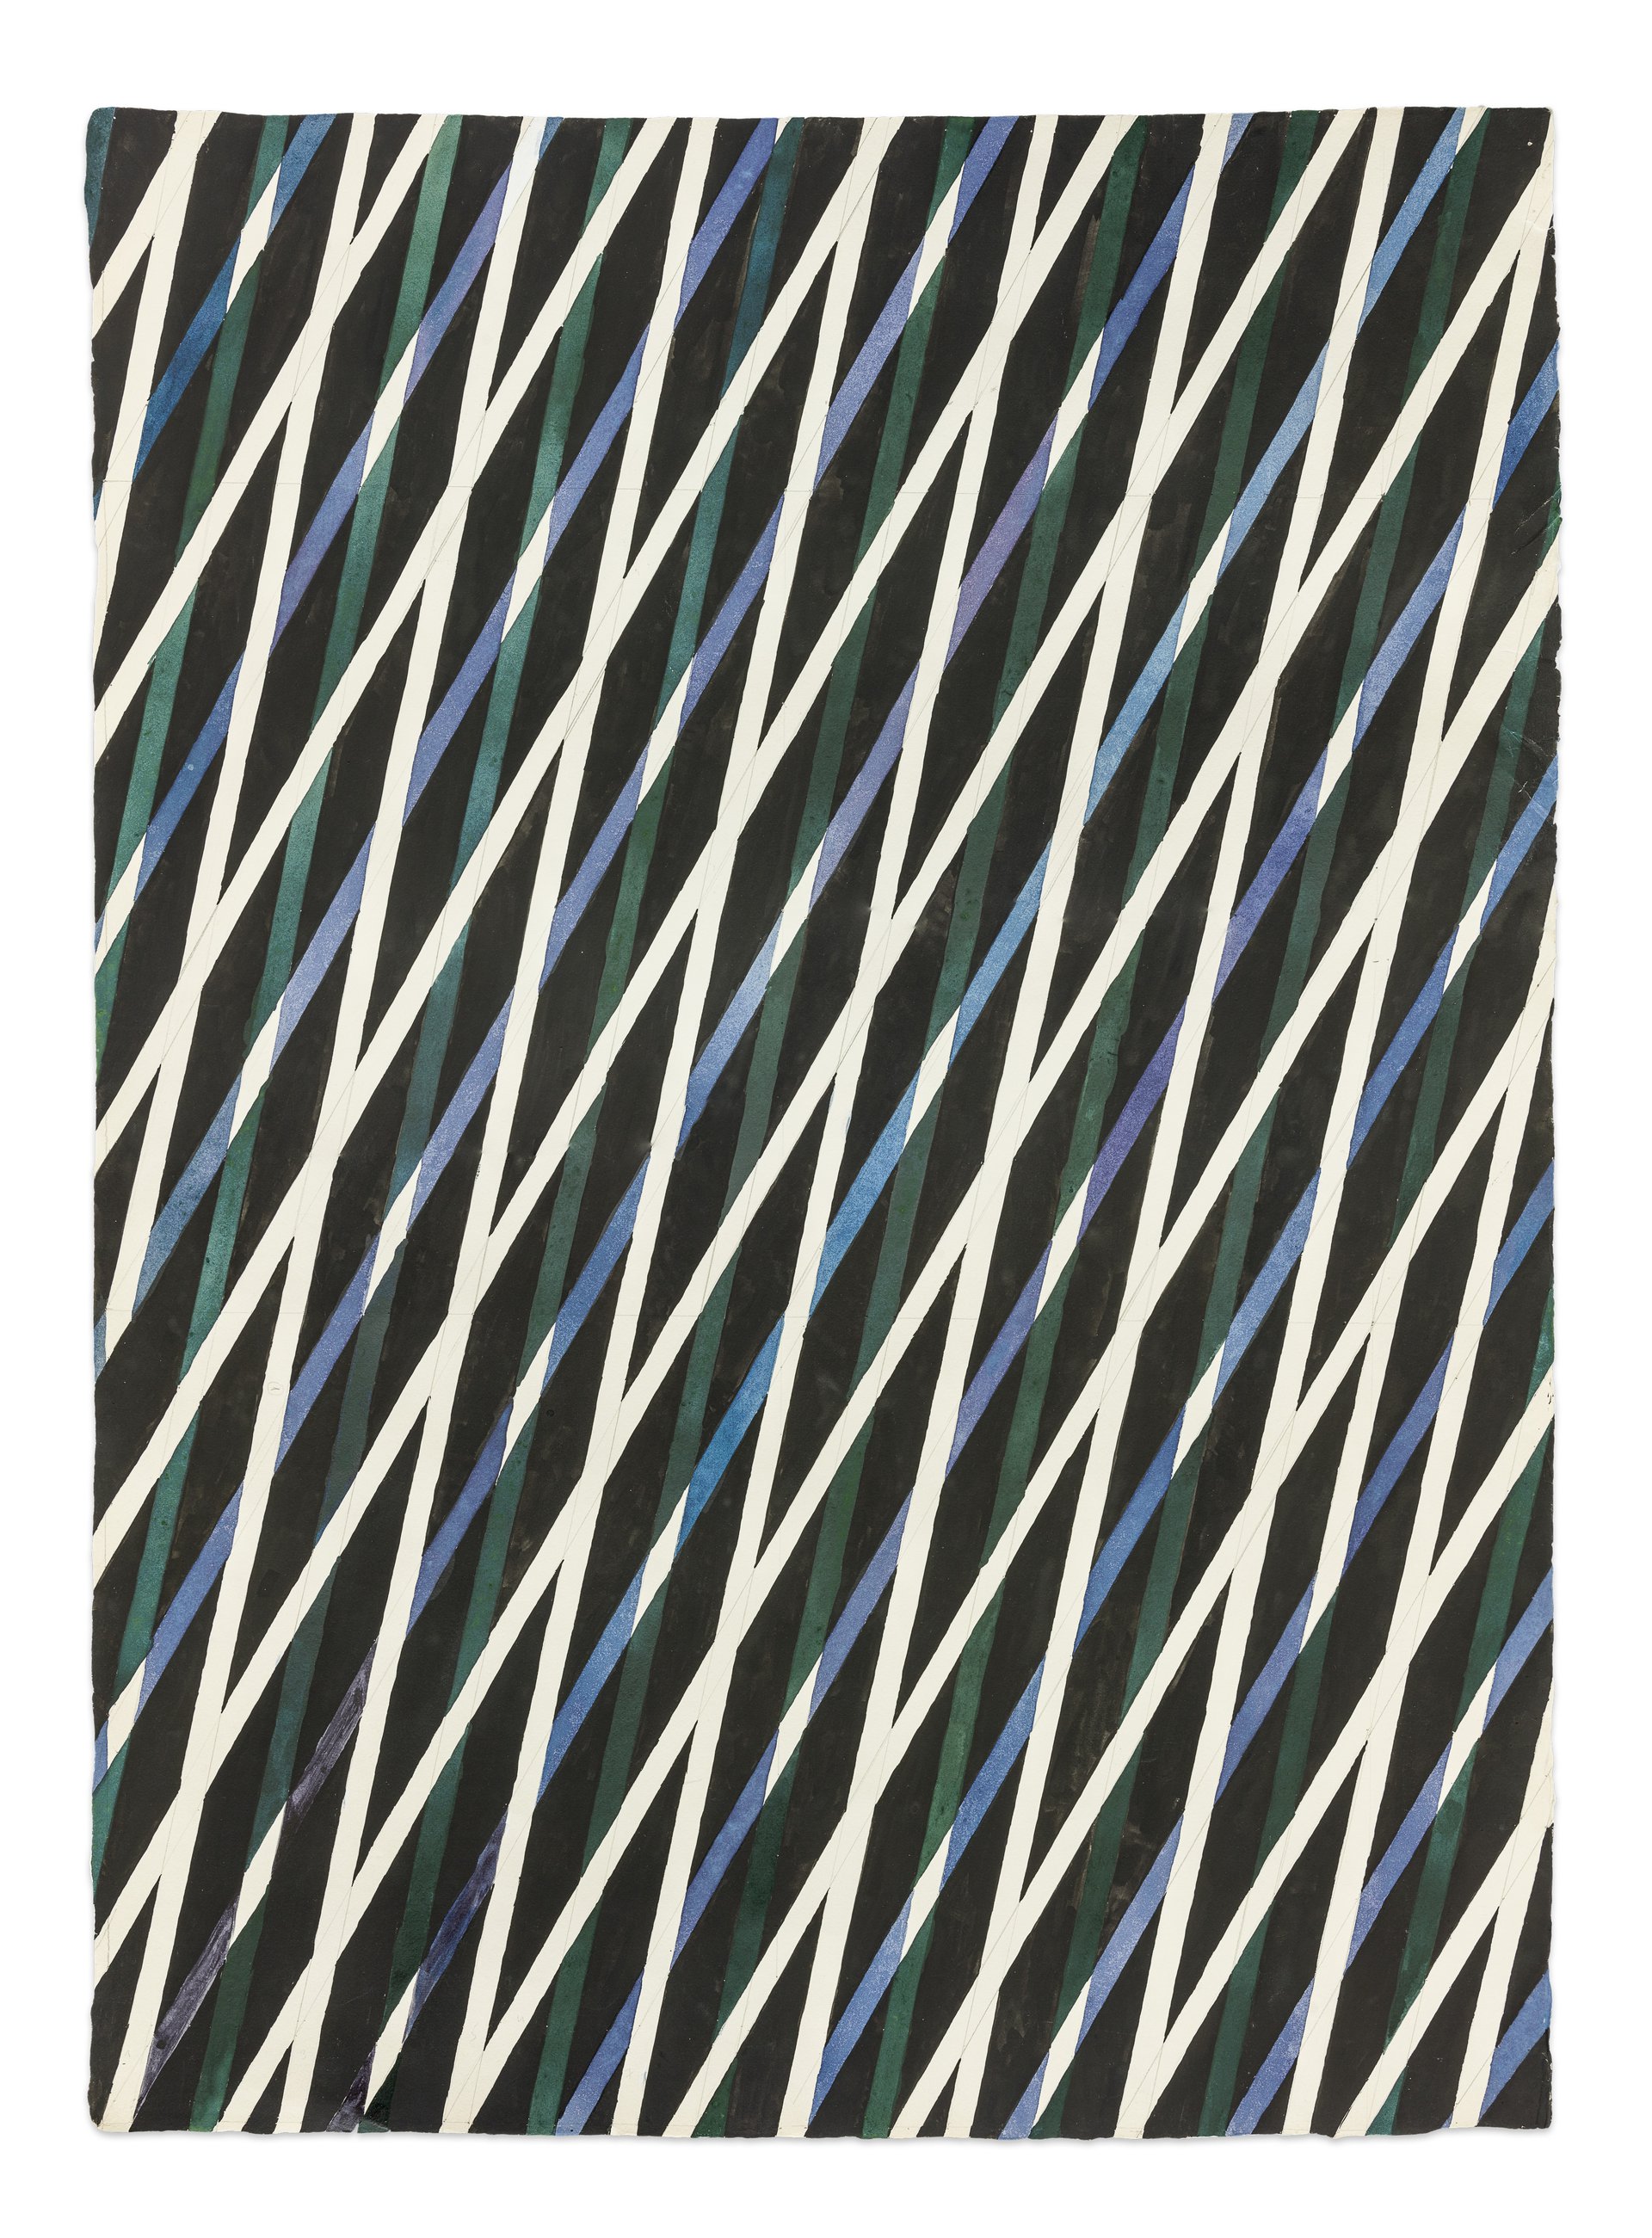 Anna AndreevaRadio Waves (Black/Green/Blue), 1974Ink, tempera, mixed media on paper, collage88.5 x 48 cm